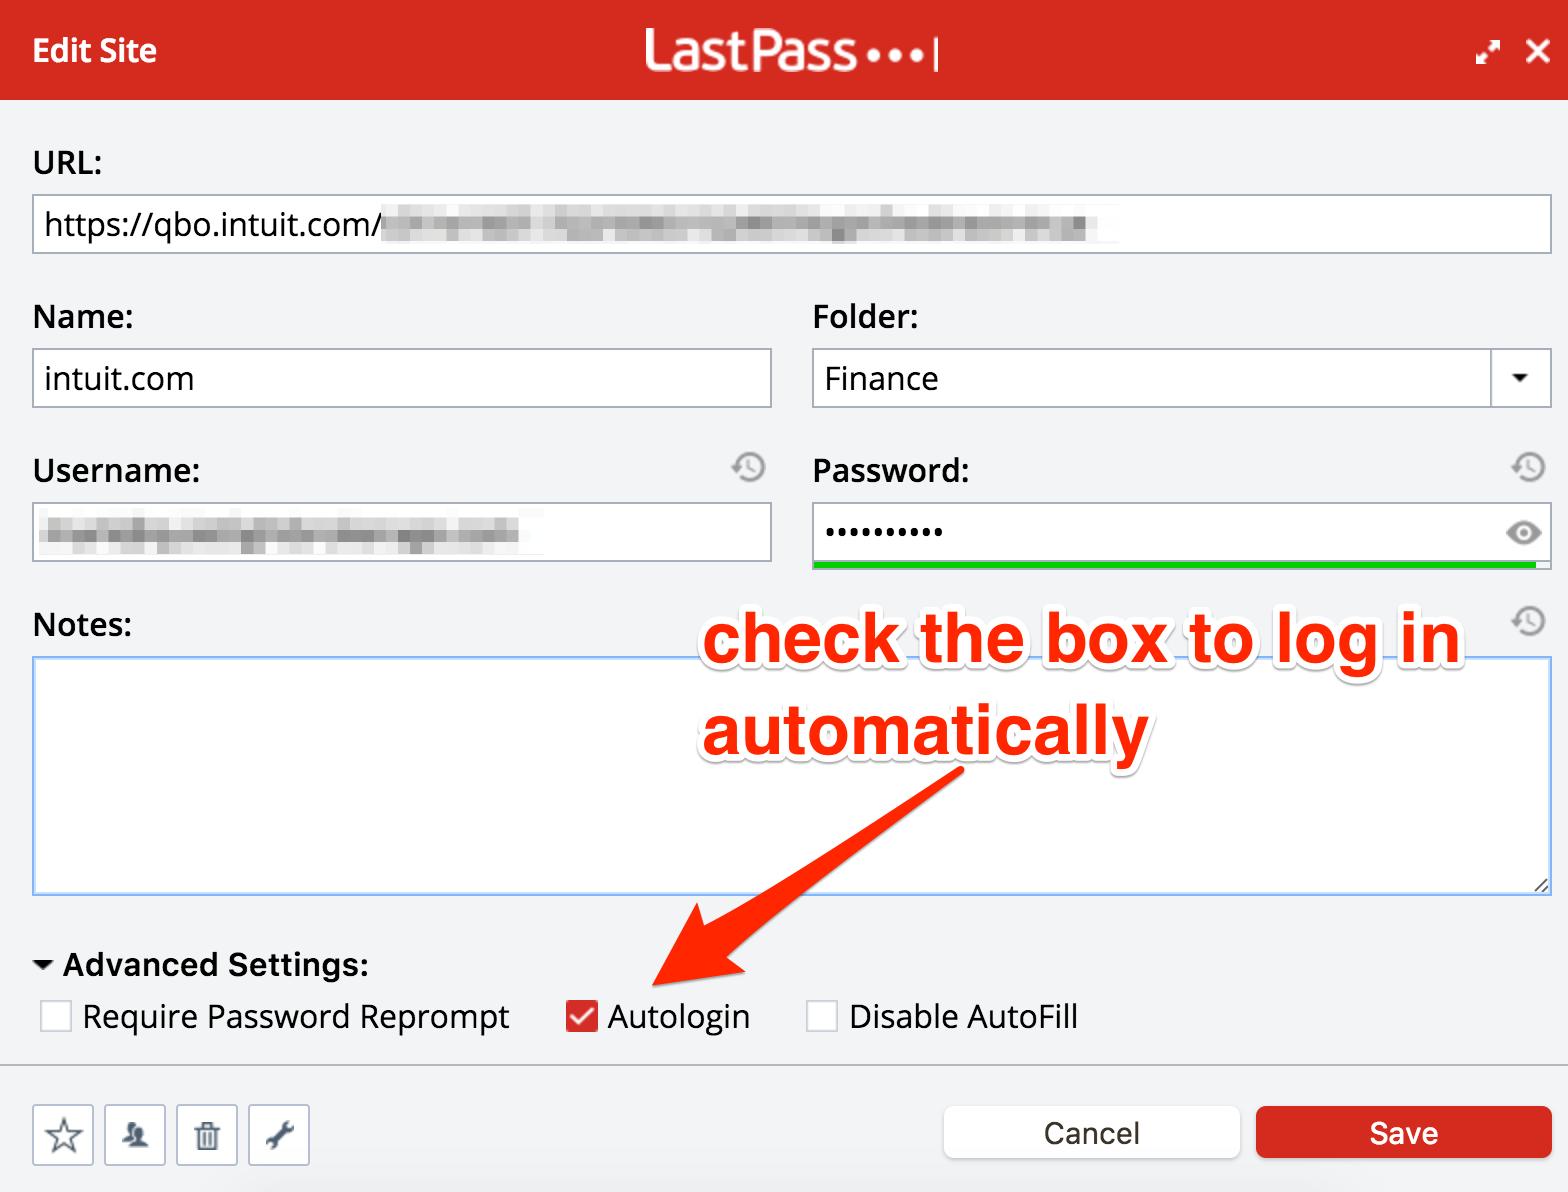 How to automatically log into lastpass